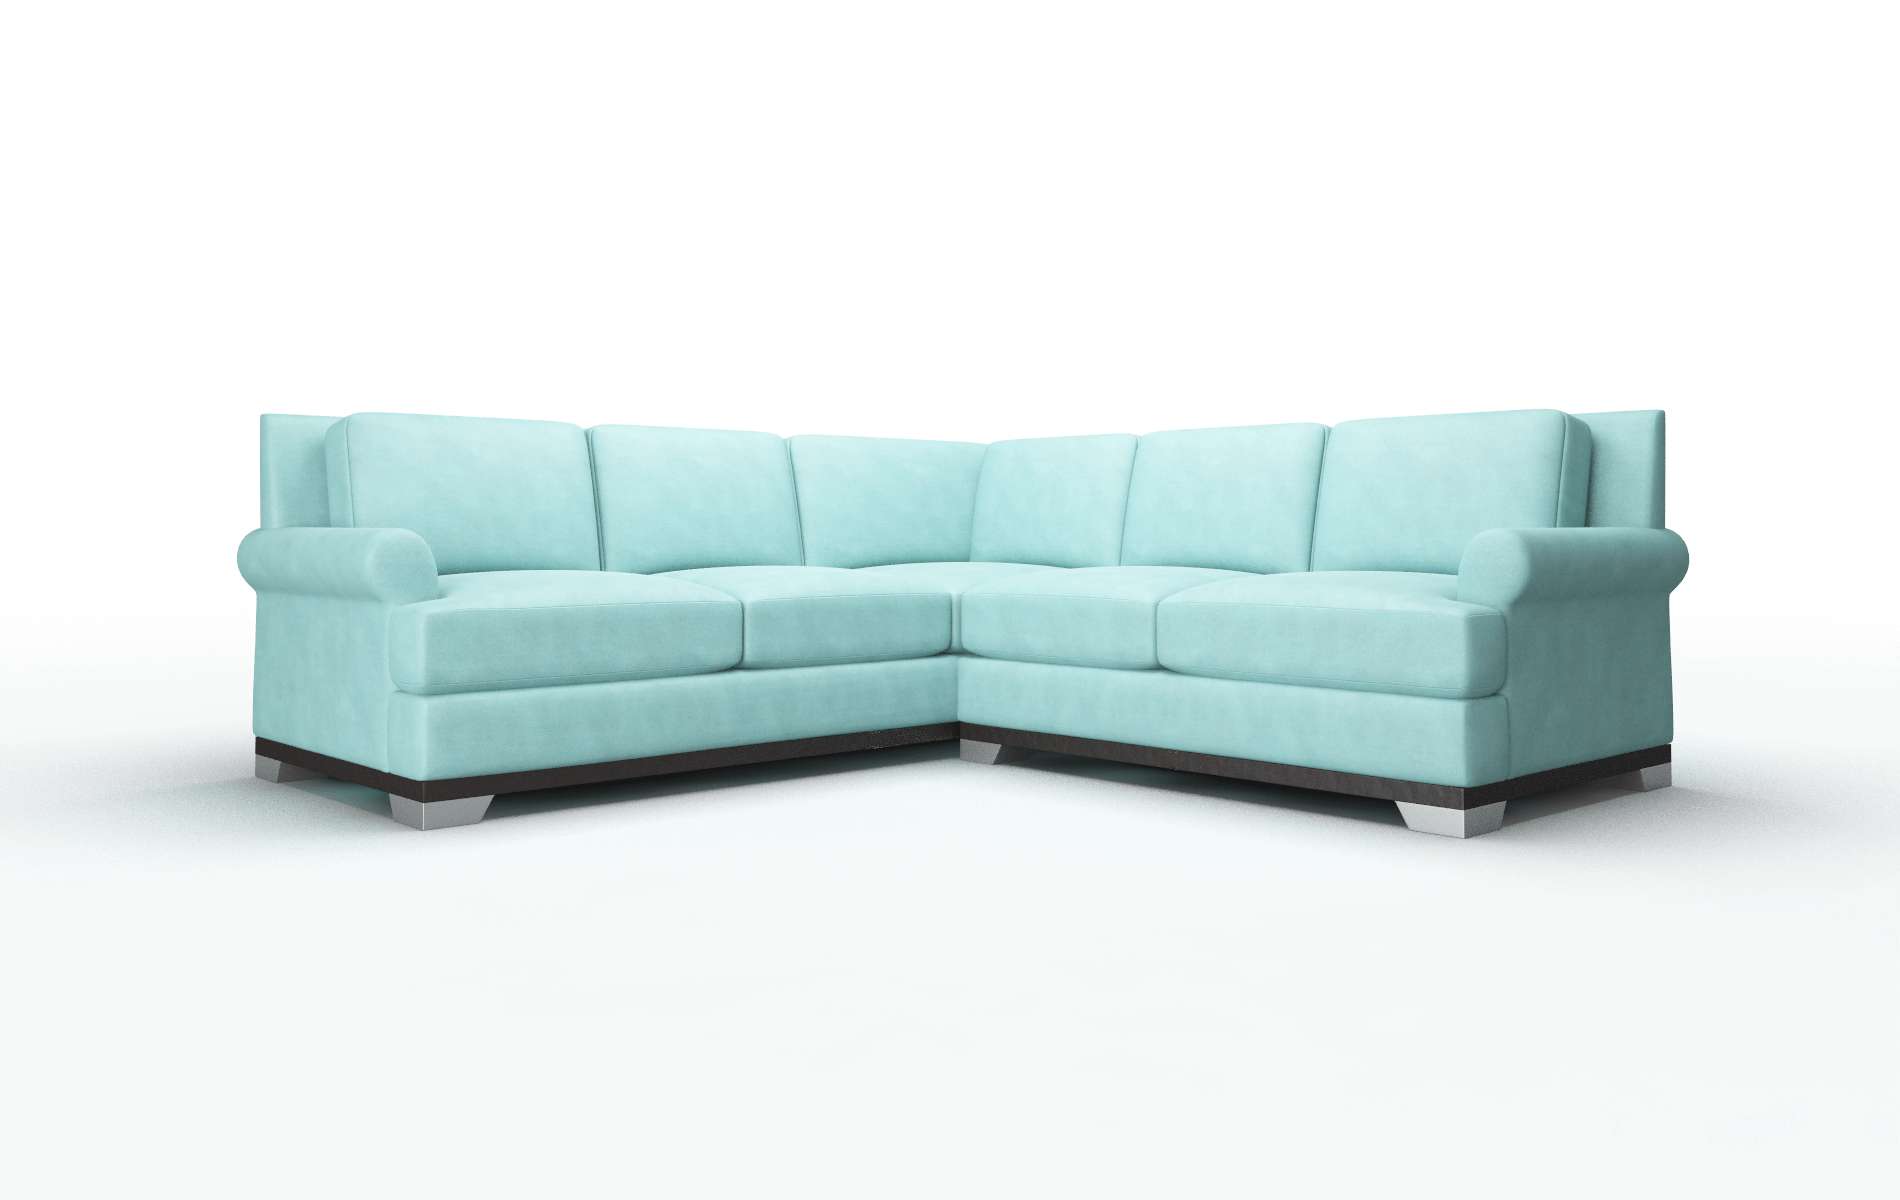 Newyork Curious Turquoise Sectional espresso legs